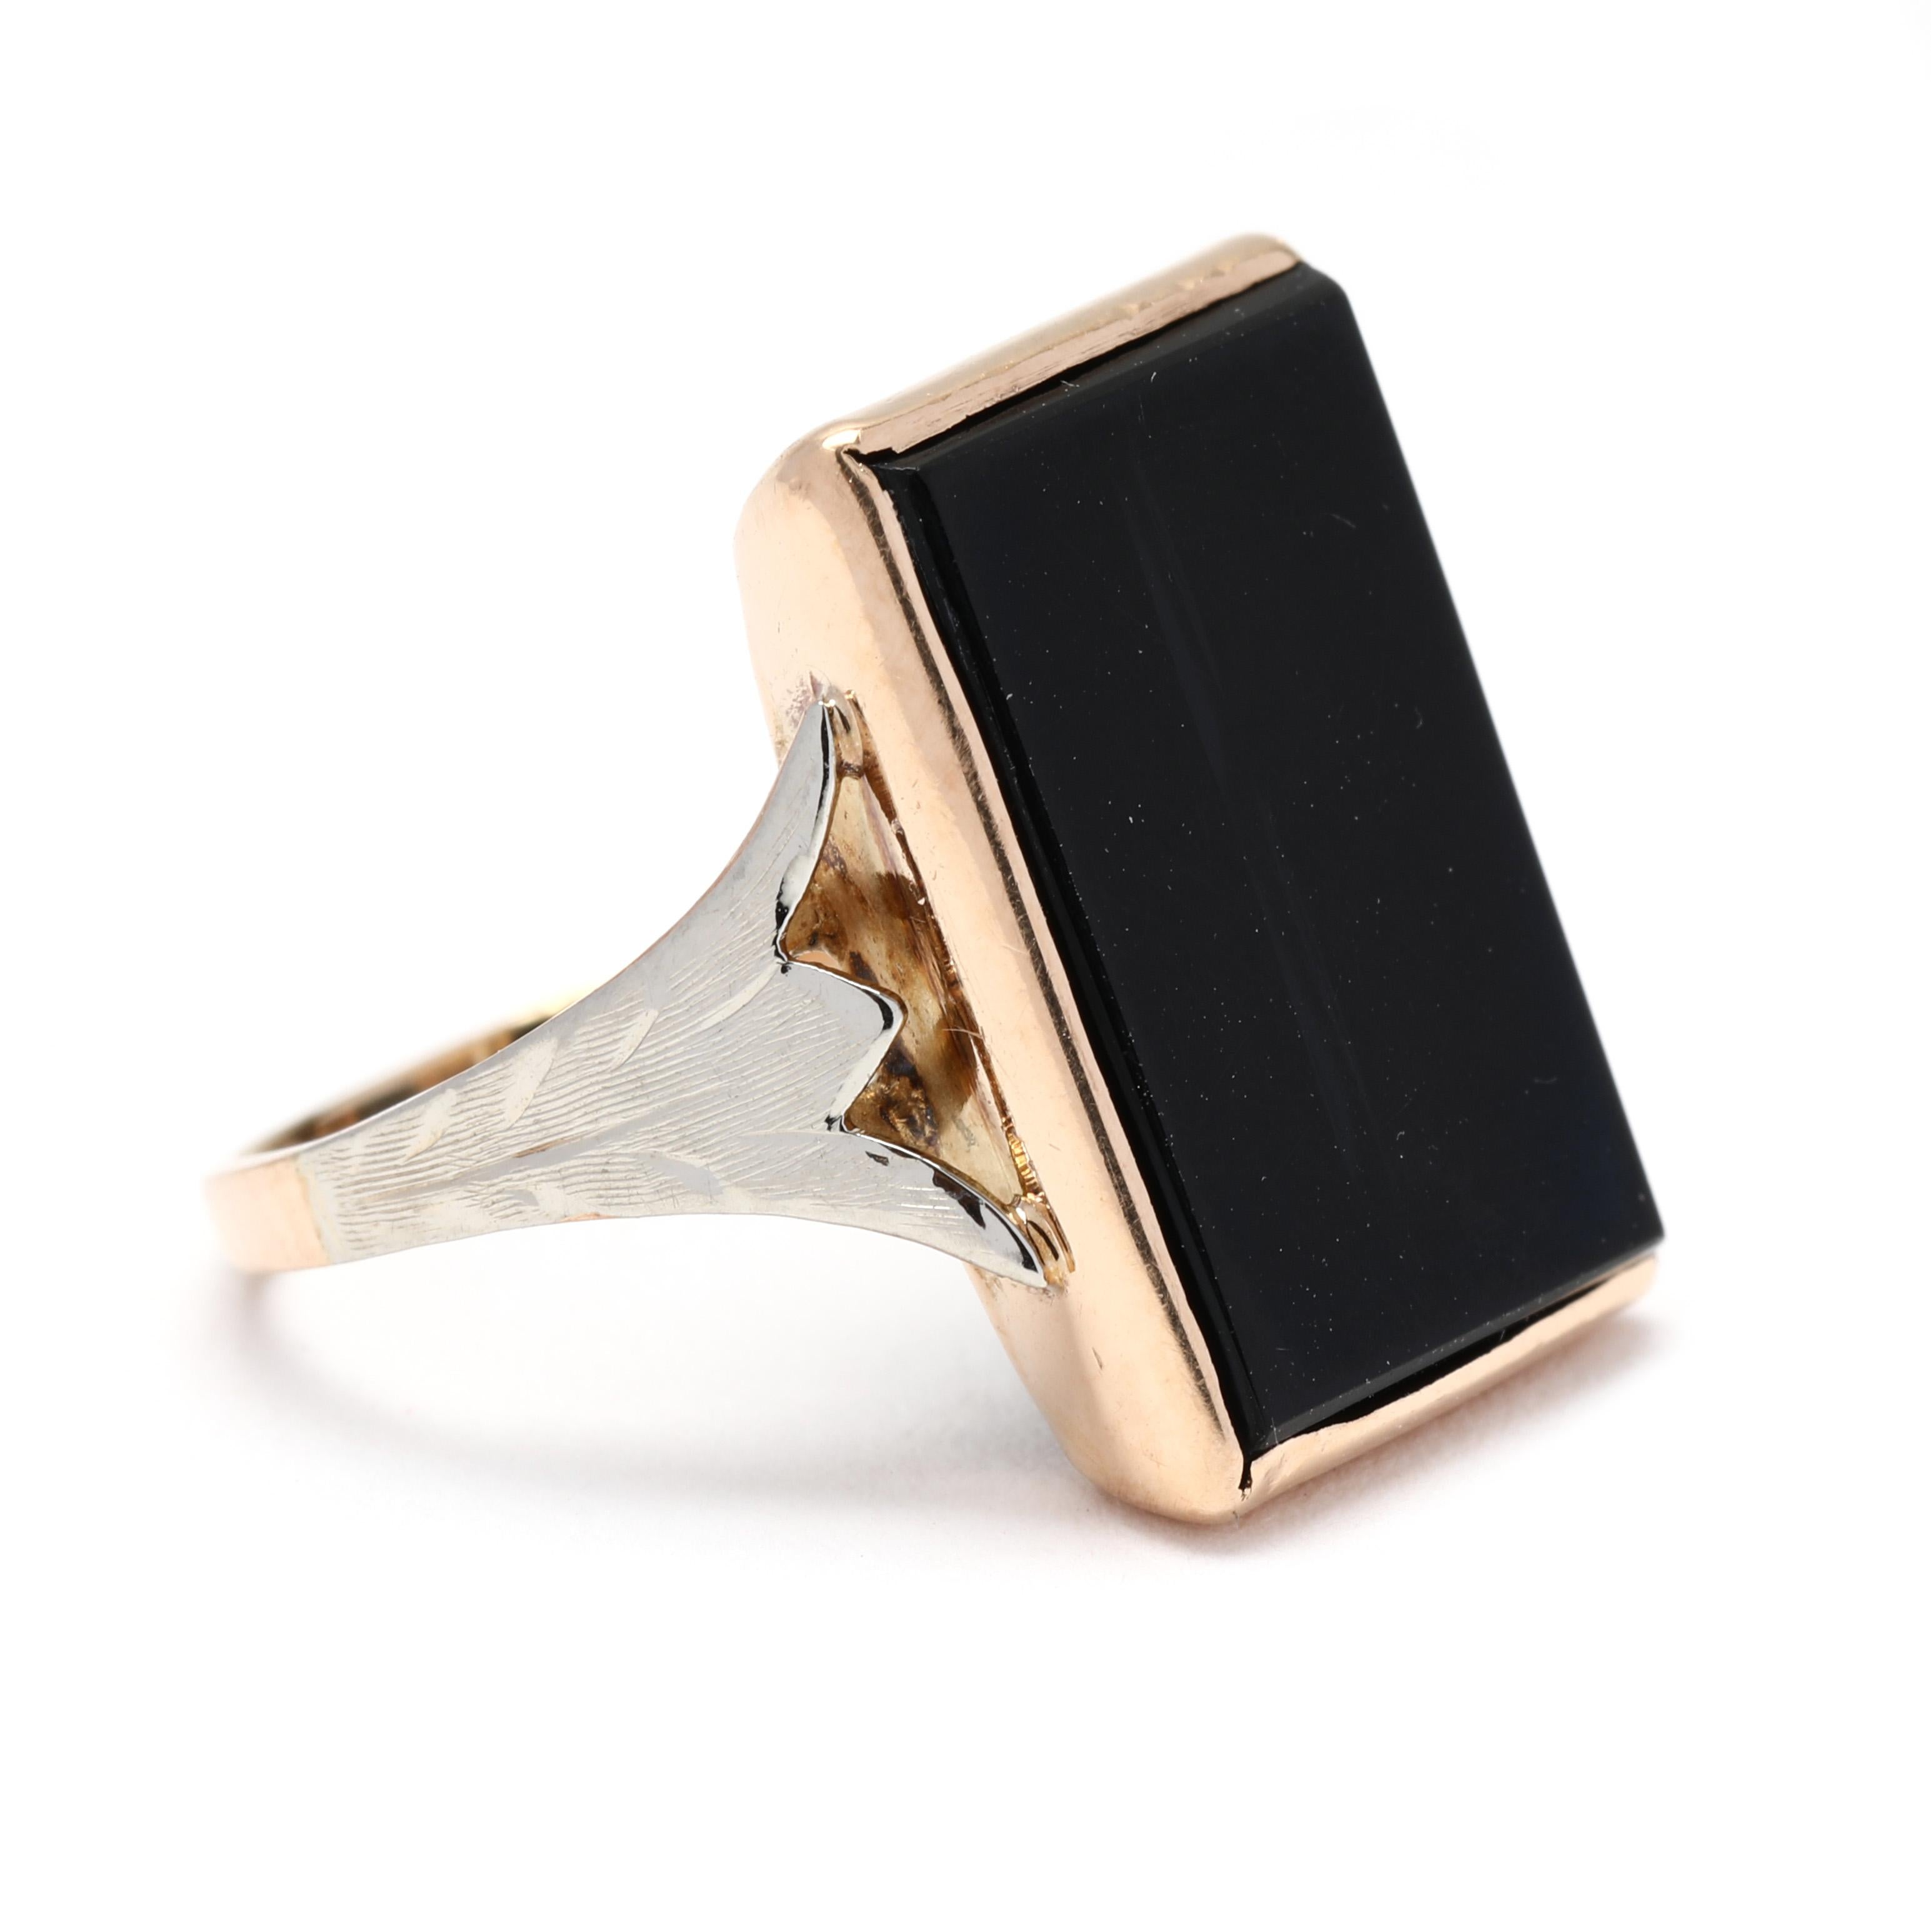 This eye-catching ring features a large, rectangular black onyx gemstone set in a 10k yellow gold setting. The black onyx, known for its deep, rich color, is beautifully contrasted by the warm tone of the gold. The rectangular shape of the gemstone